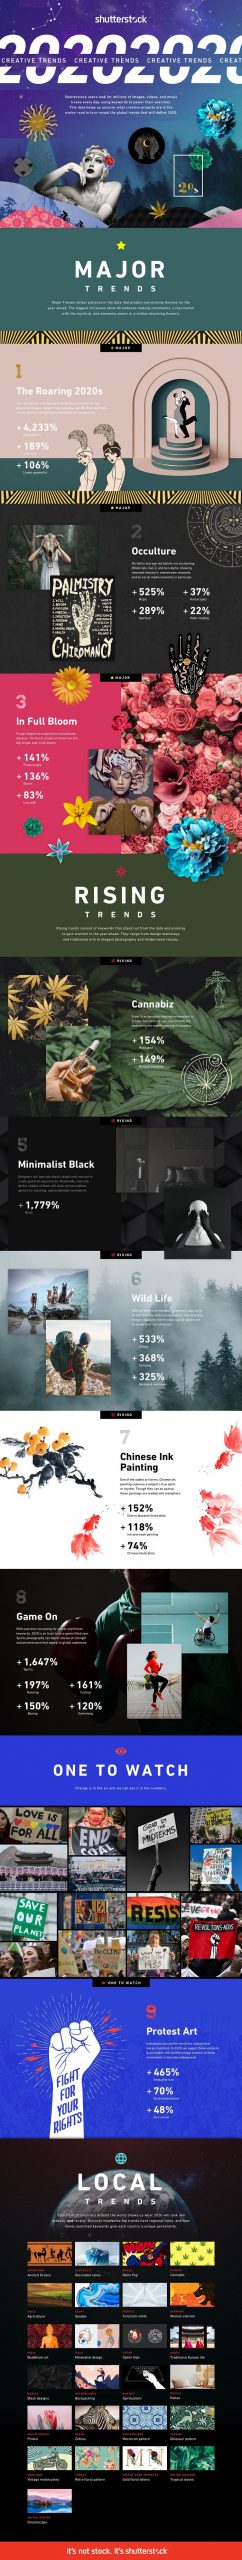 shutterstock outlines rising visual trends of note for 2020 infographic scaled 1